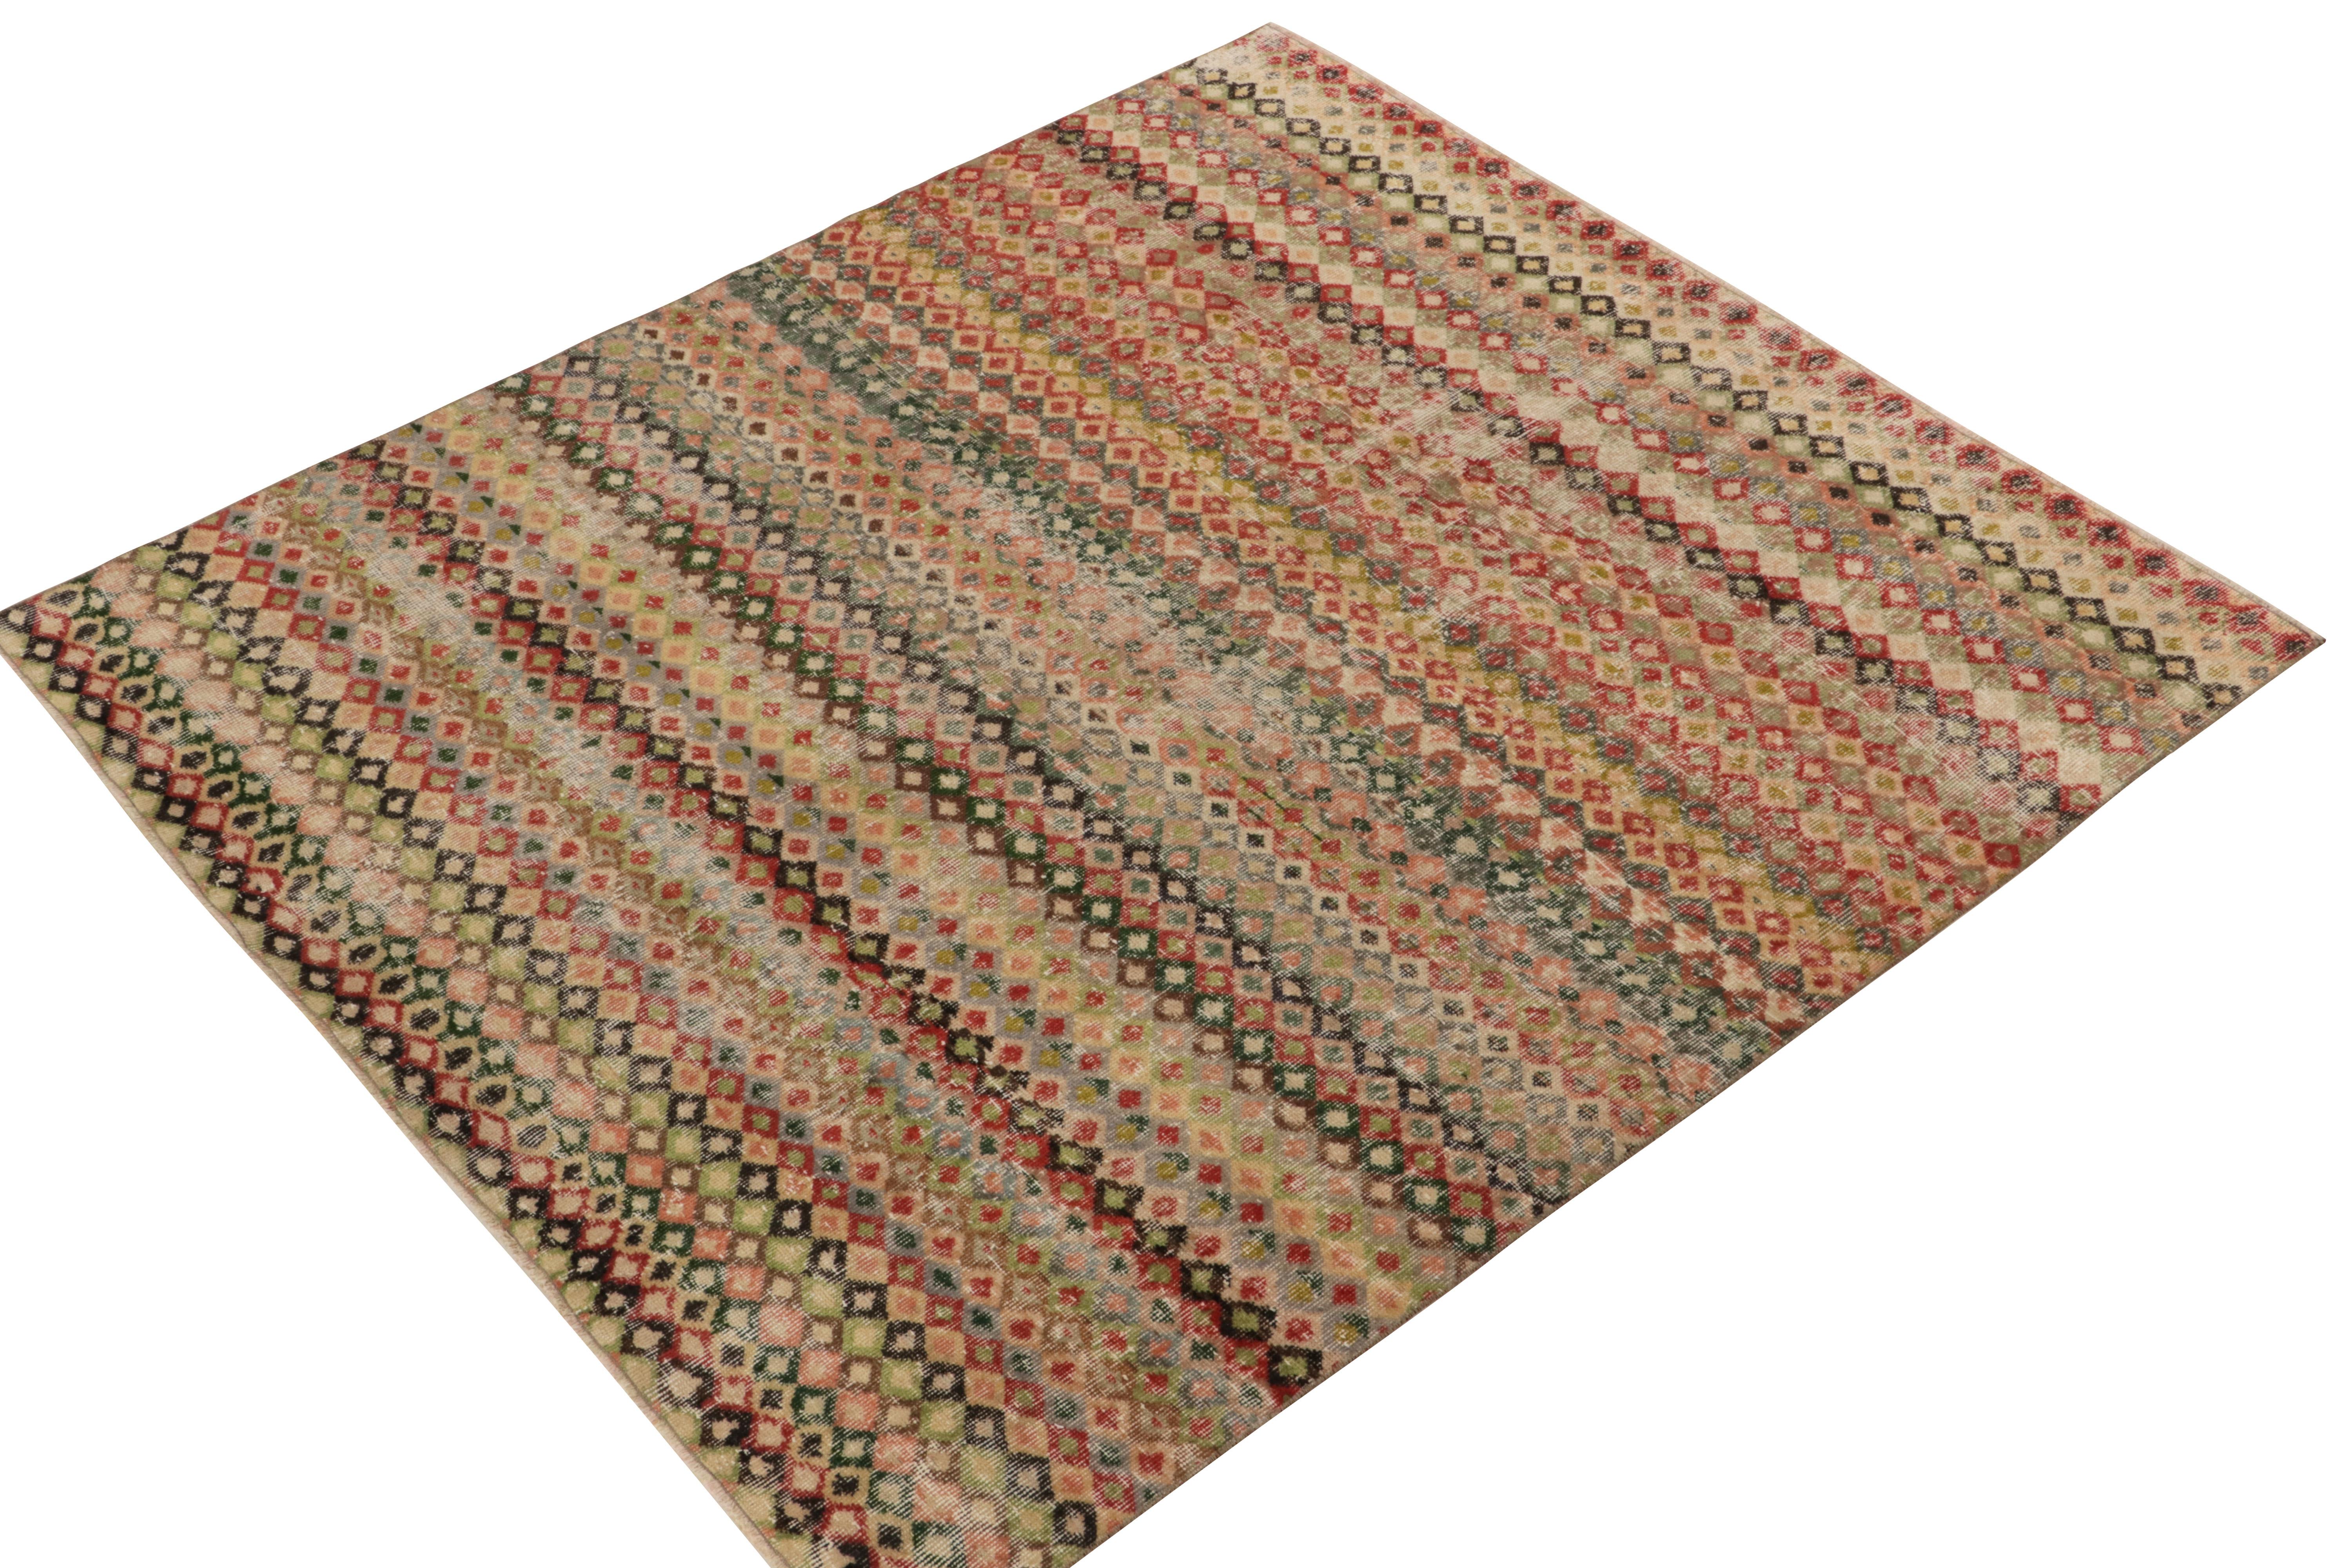 Hand-knotted in wool, a 6x7 vintage rug from a playful Turkish atlier entering Rug & Kilim’s commemorative Mid-Century Pasha Collection. 

This inviting piece enjoys a series of diamond patterns in variegated tones of red, pink, beige-brown &